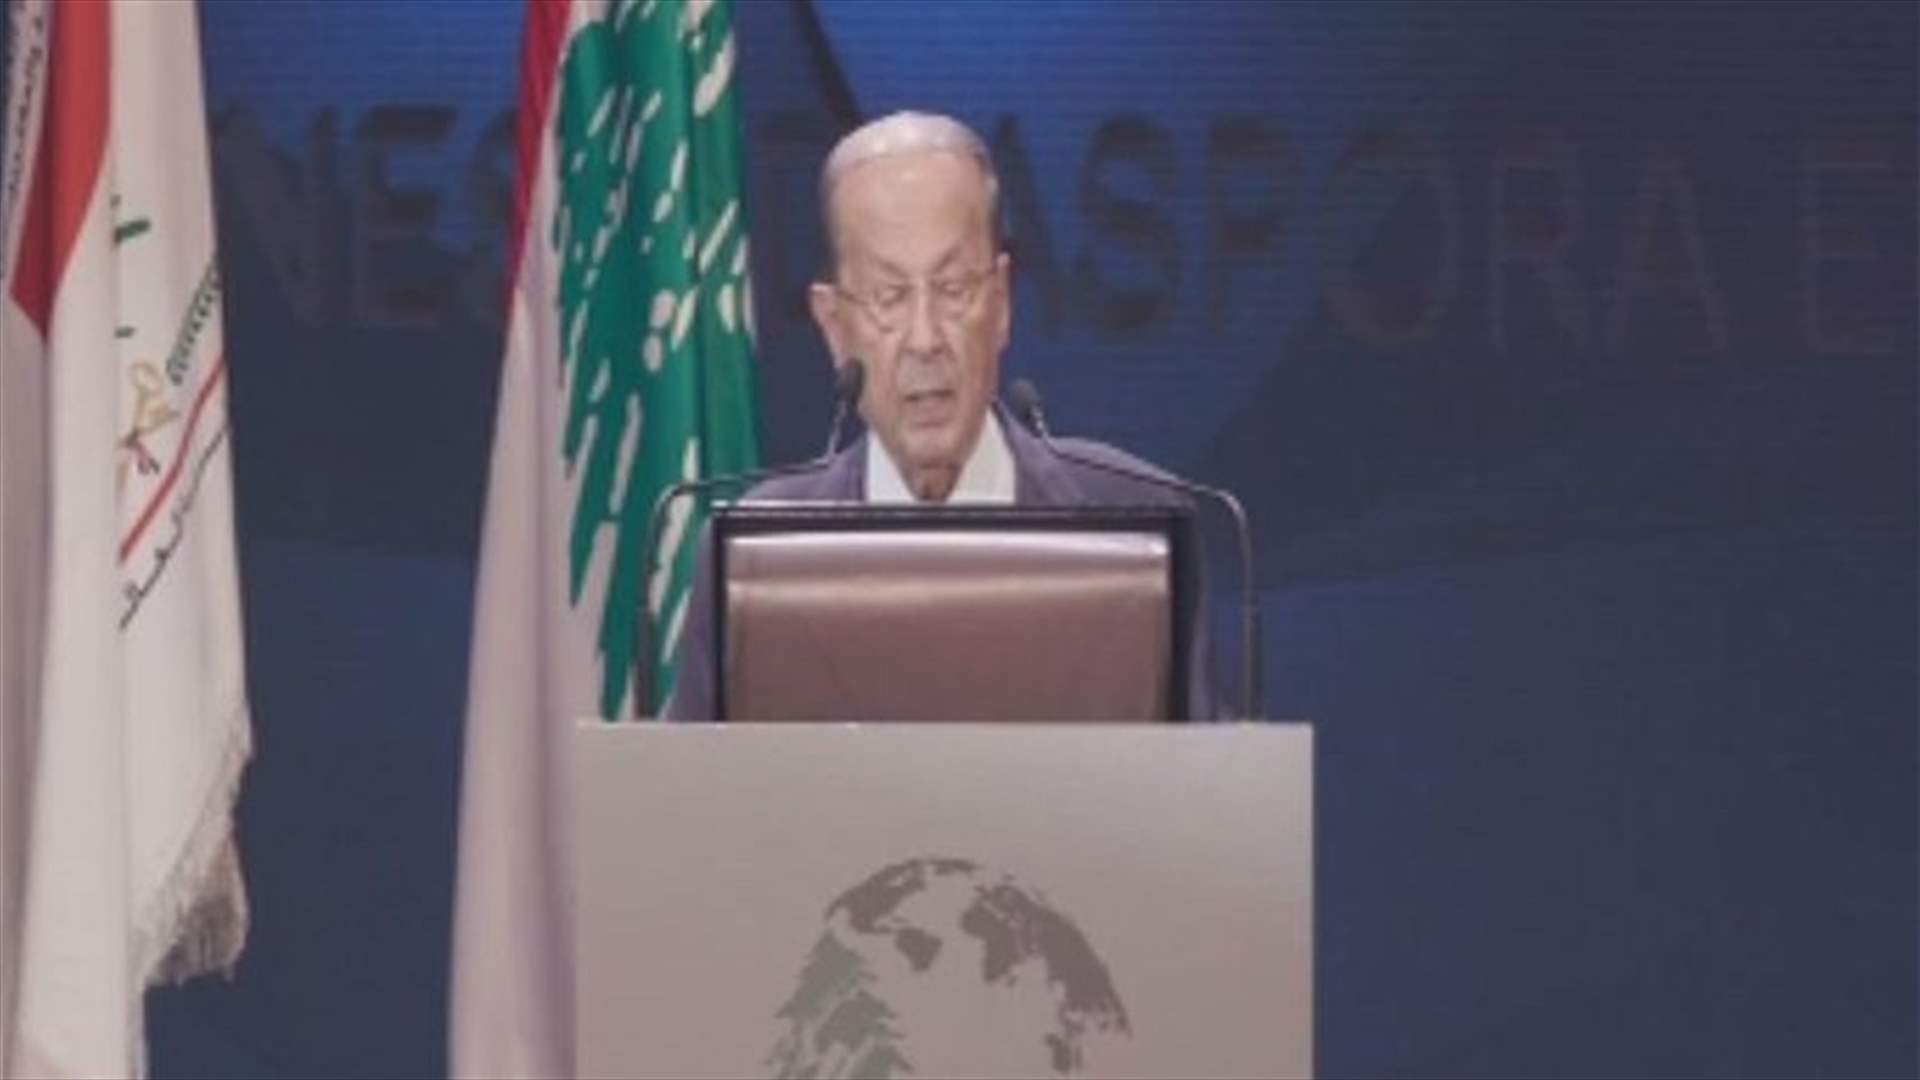 Aoun during LDE conference: Lebanon fighting to end chronic accumulated crises